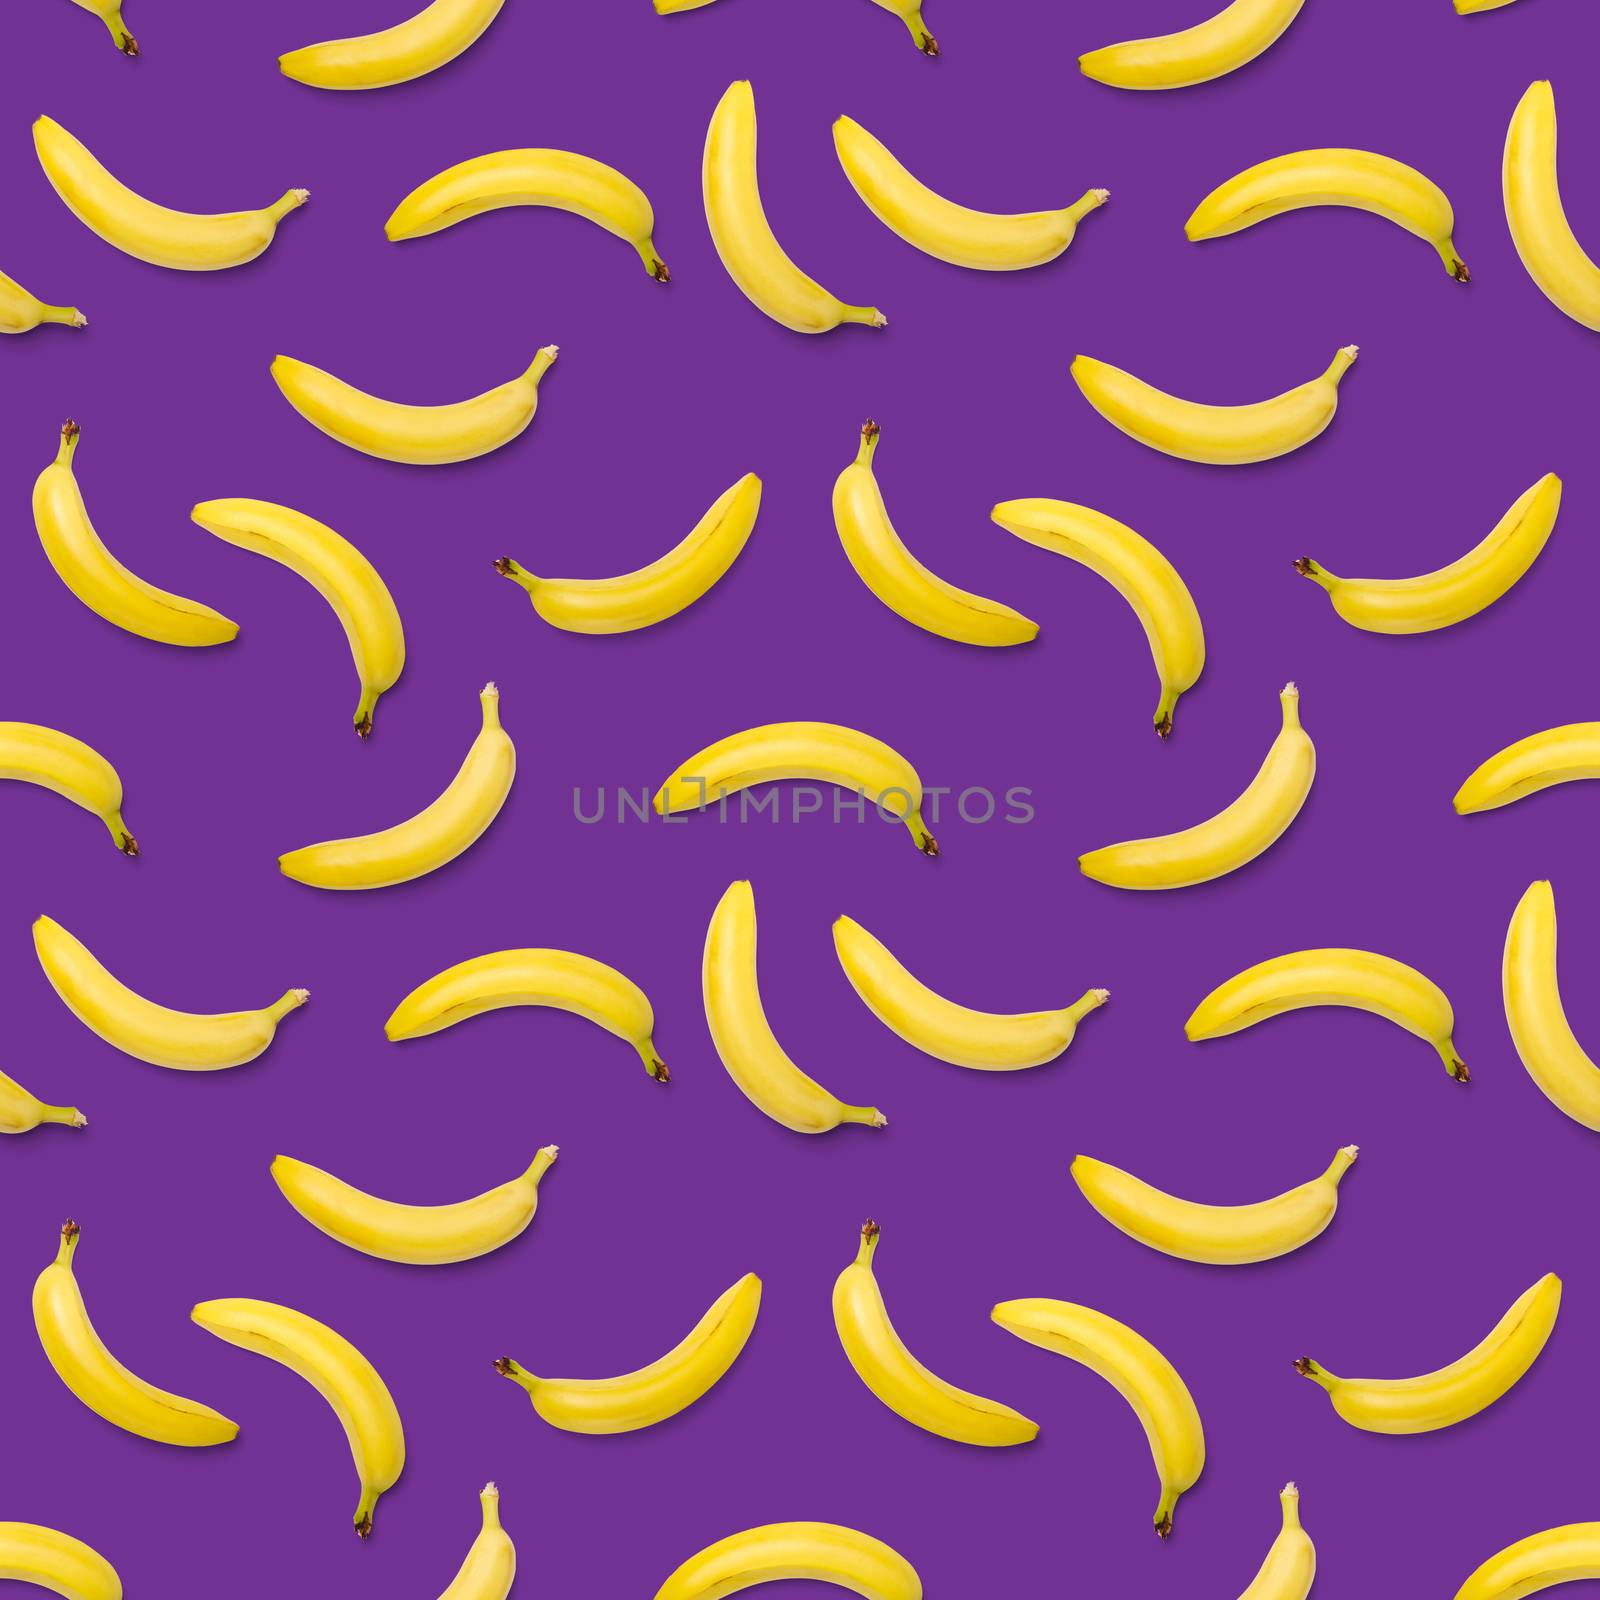 Bananas seamless pattern. pop art bananas pattern. Tropical abstract background with banana. Colorful fruit pattern of yellow banana on purple background, flat lay